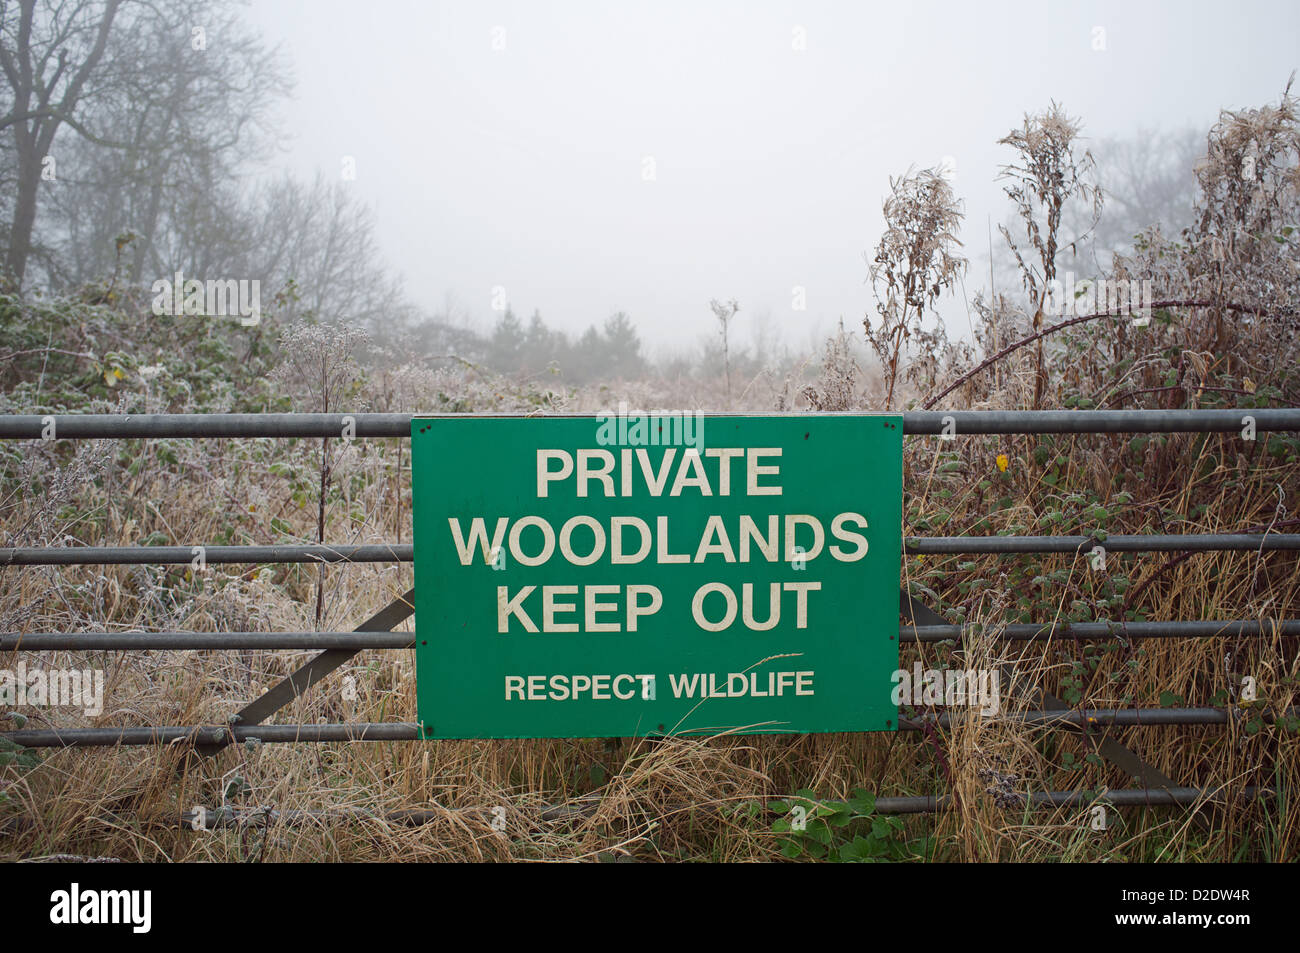 Private woodlands keep out sign Stock Photo